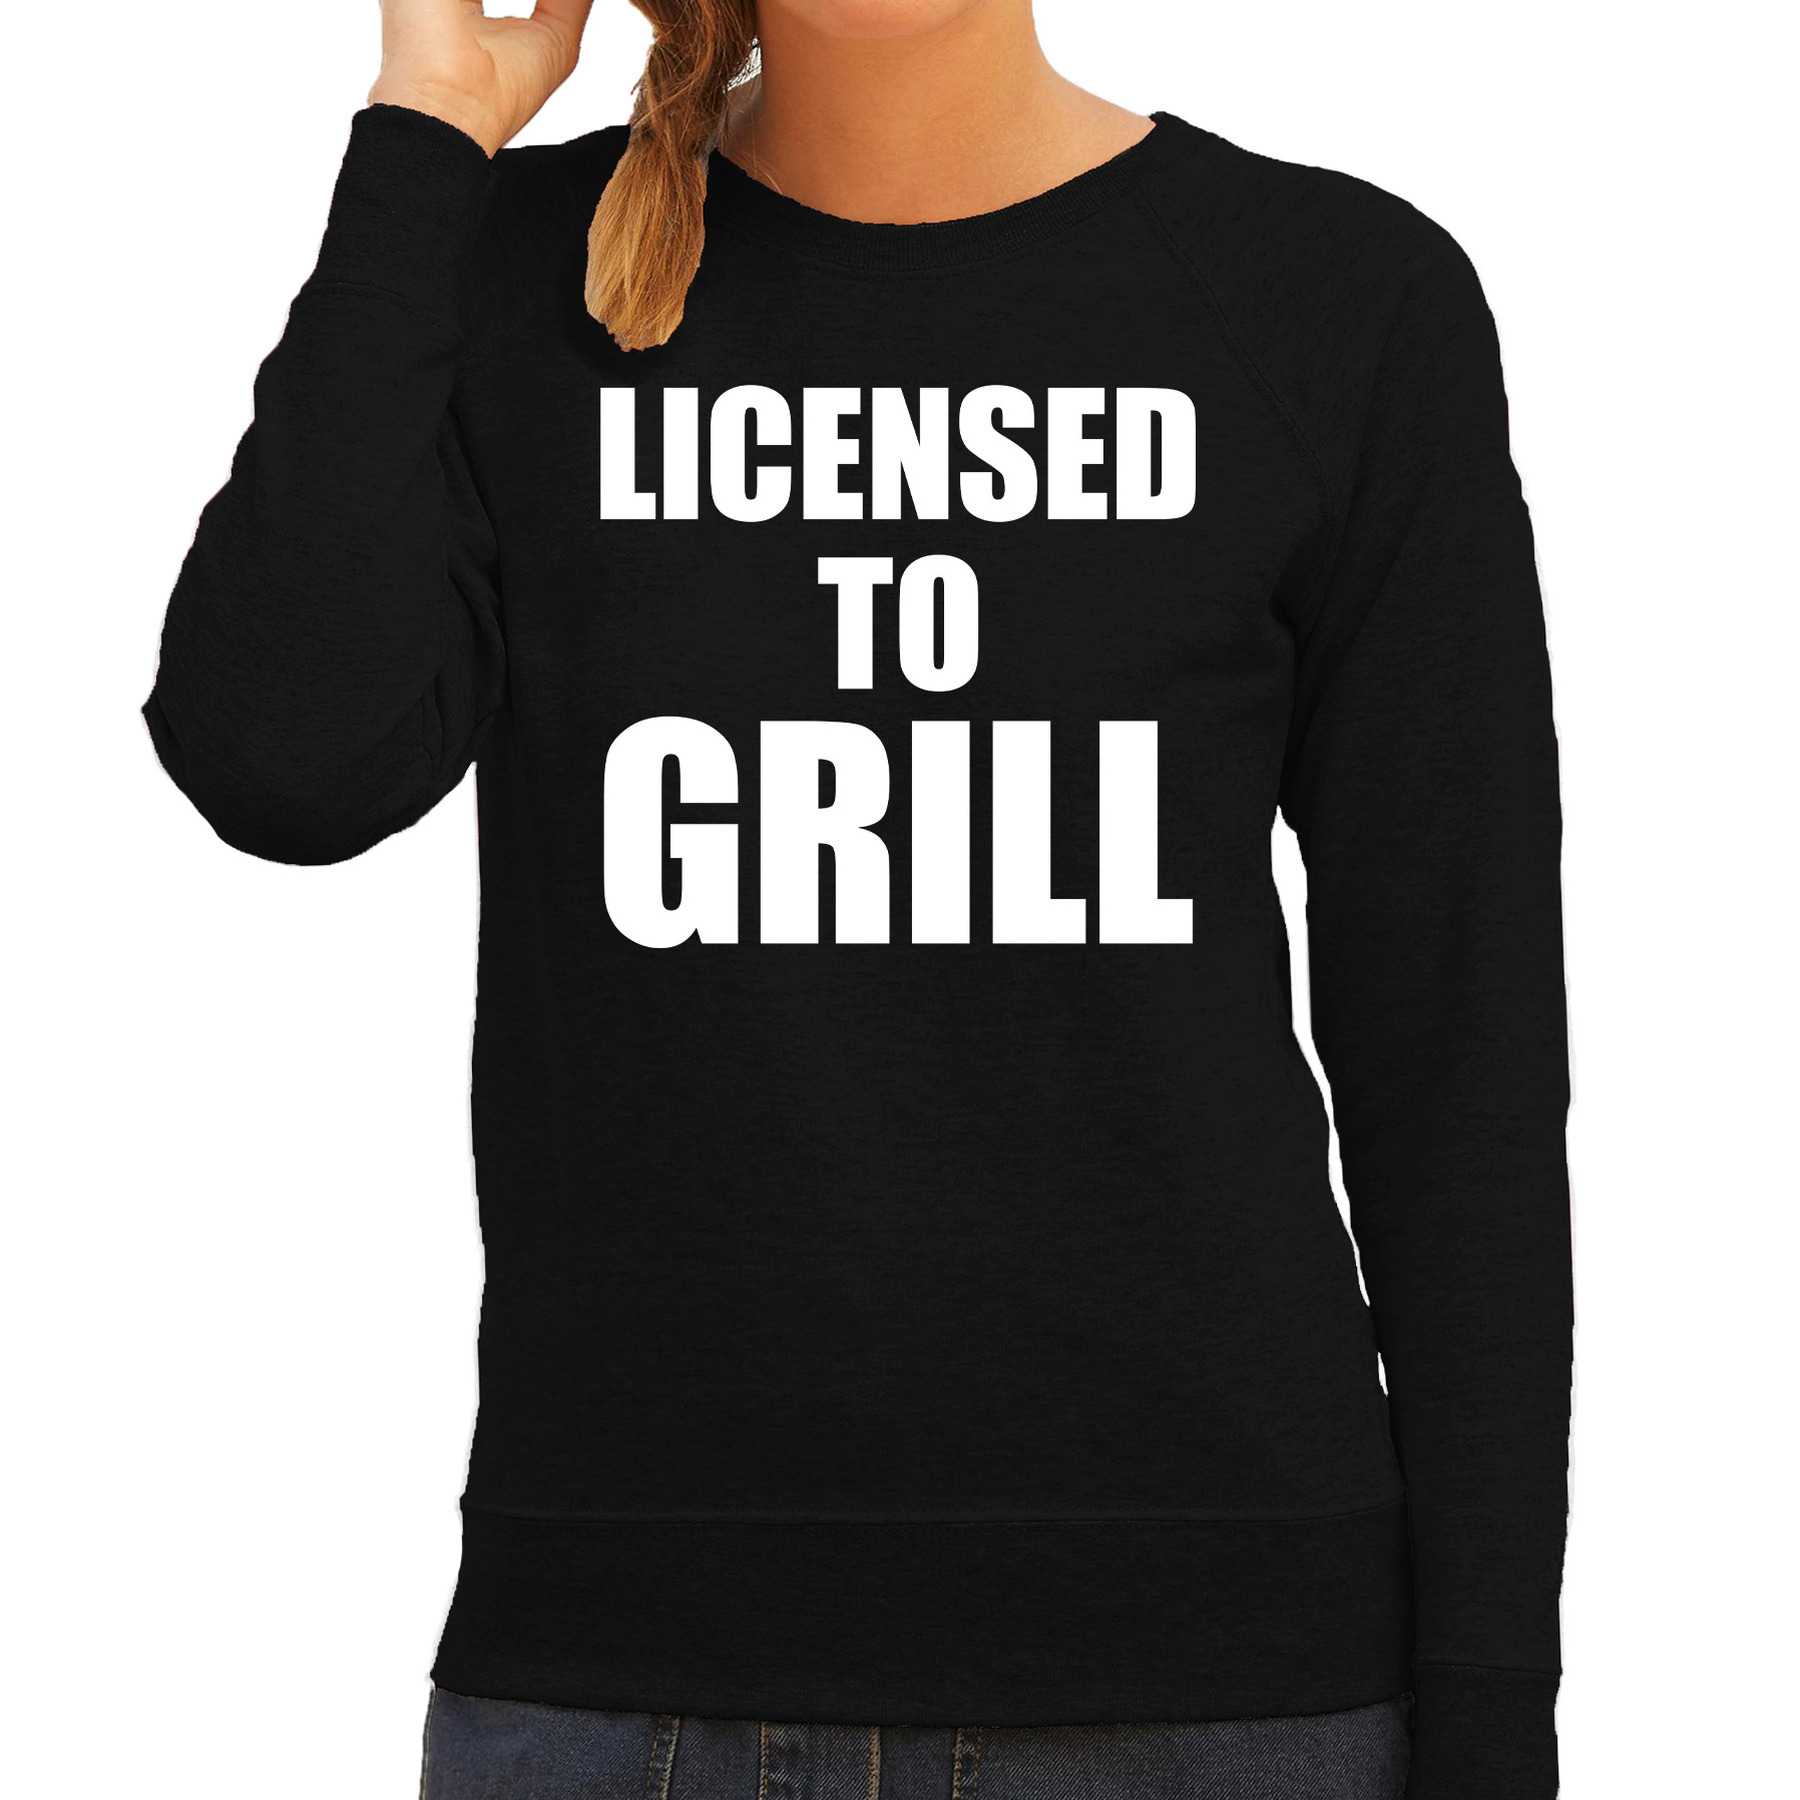 Licensed to grill bbq-barbecue cadeau sweater-trui zwart voor dames